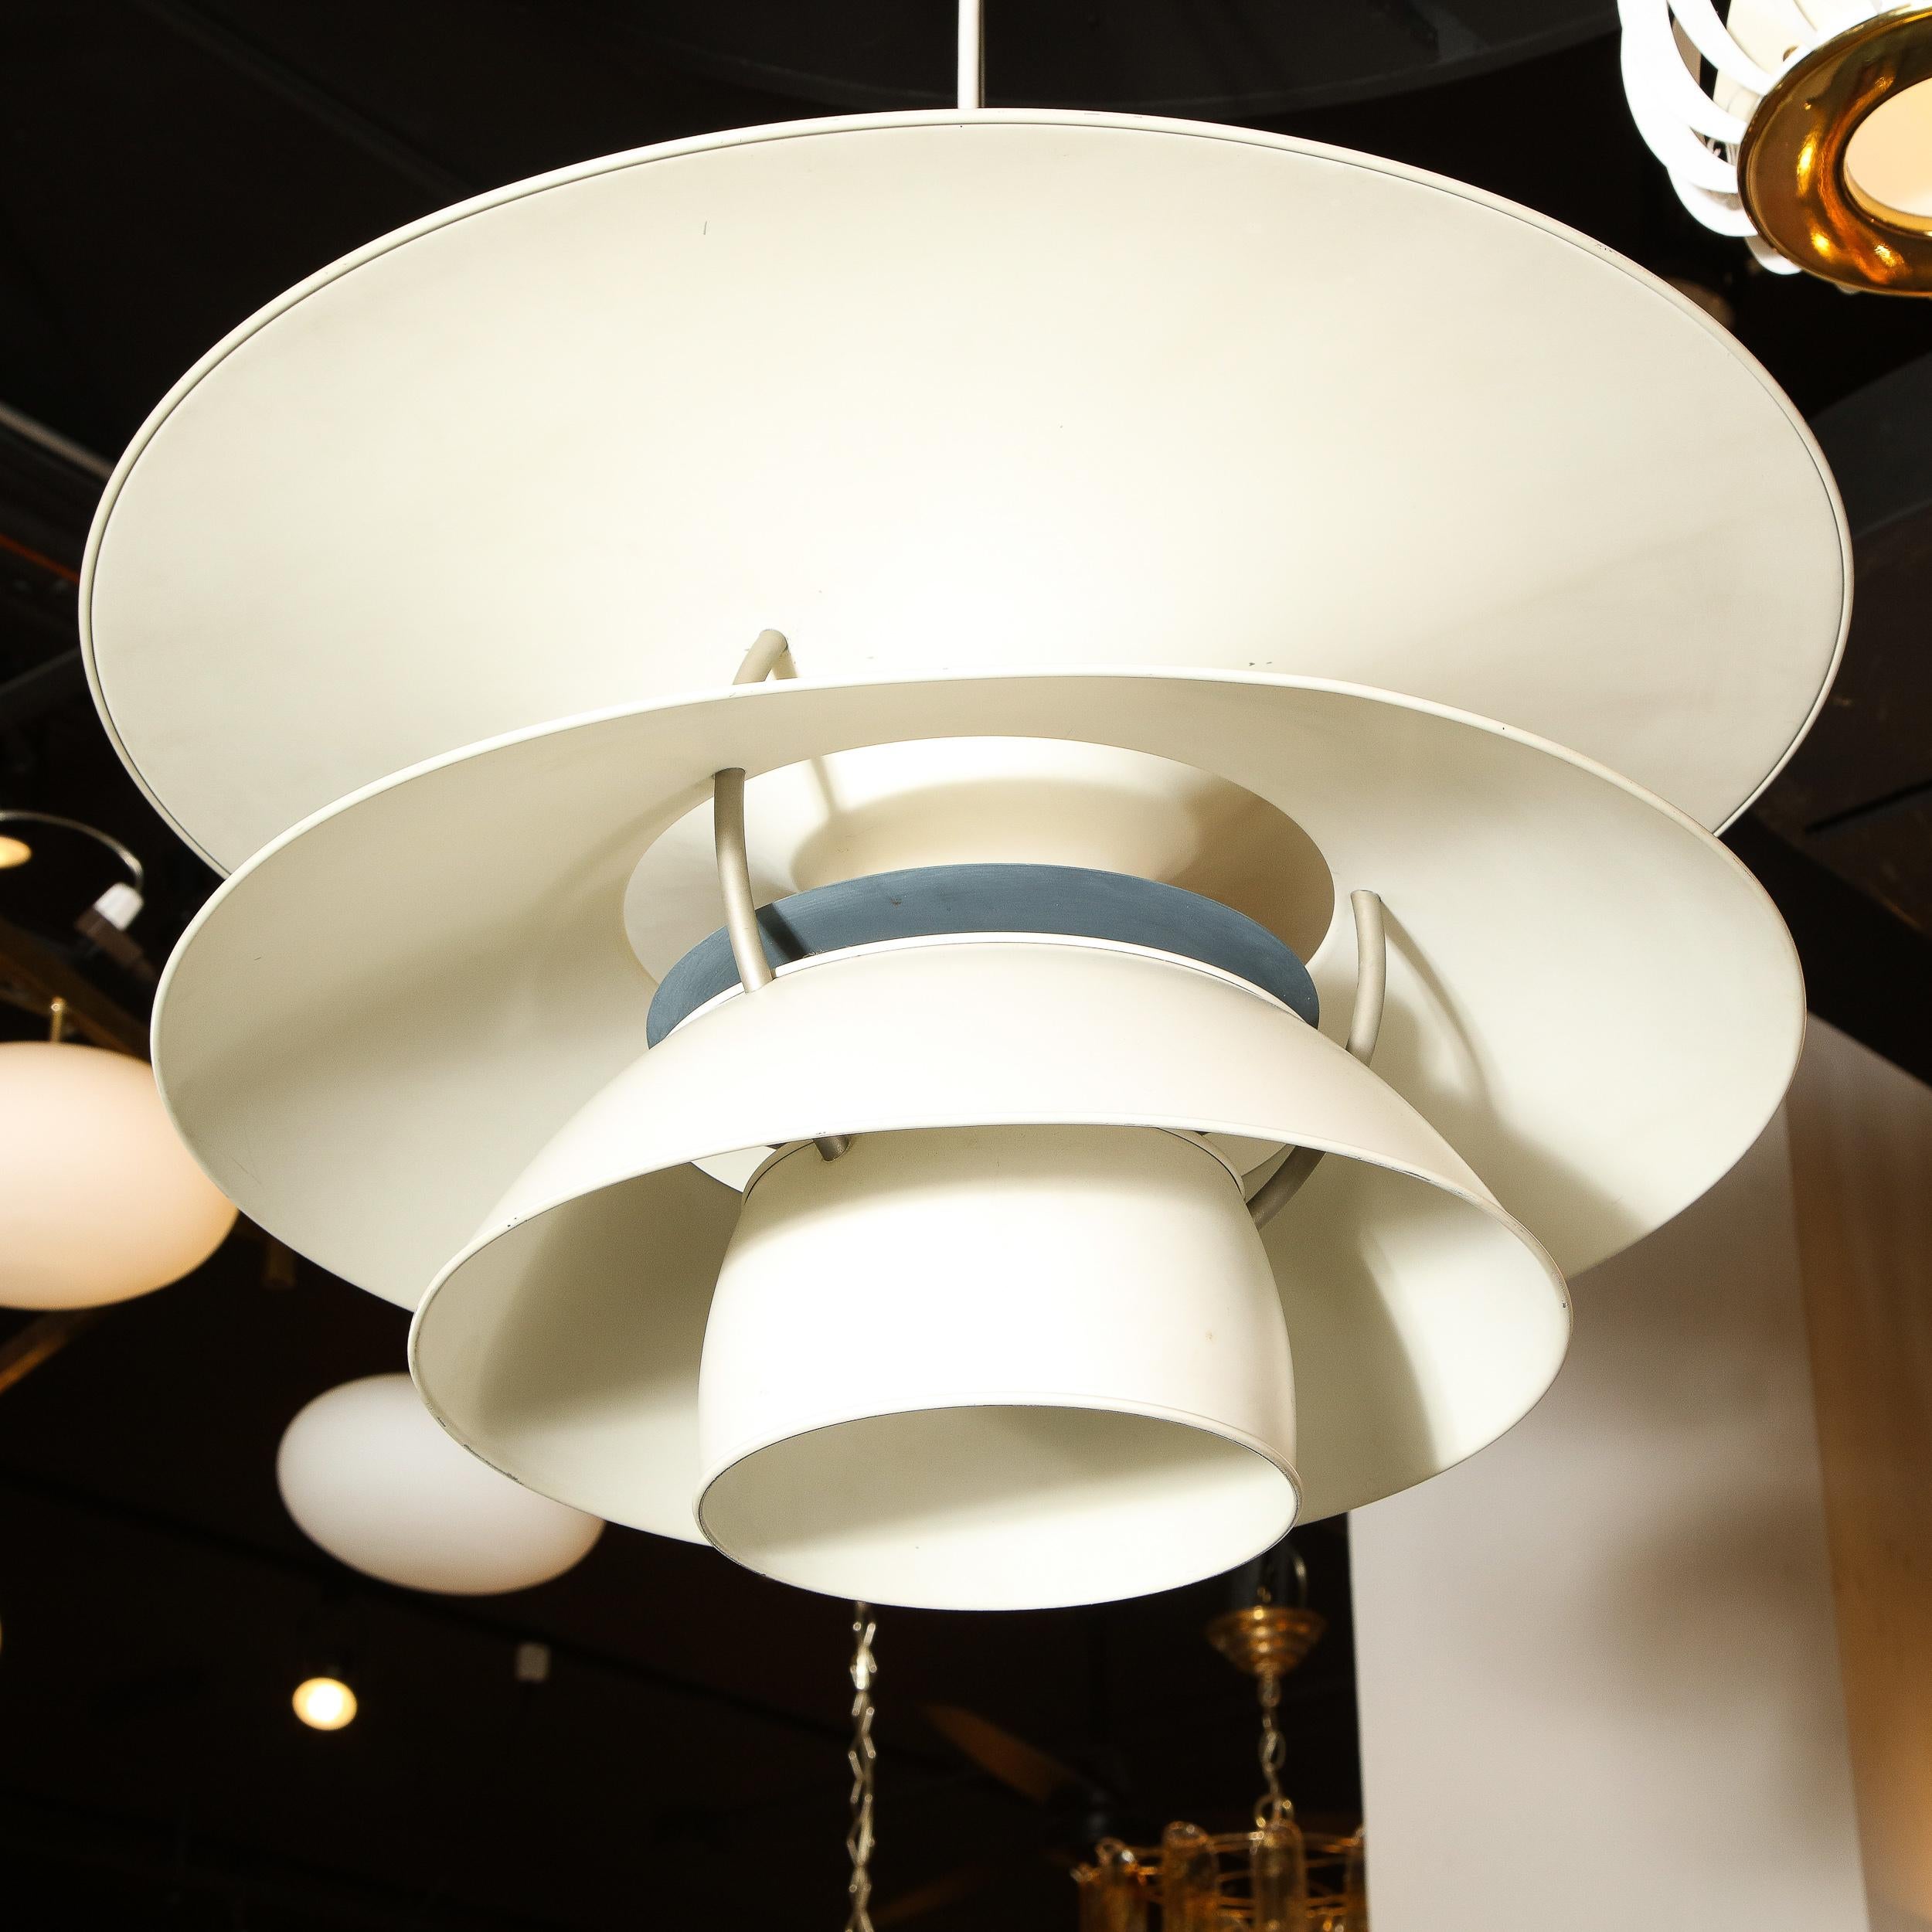 Late 20th Century Mid-Century Modern Iconic PH5-4 1/2 Pendent by Poul Henningsen for Louis Poulsen